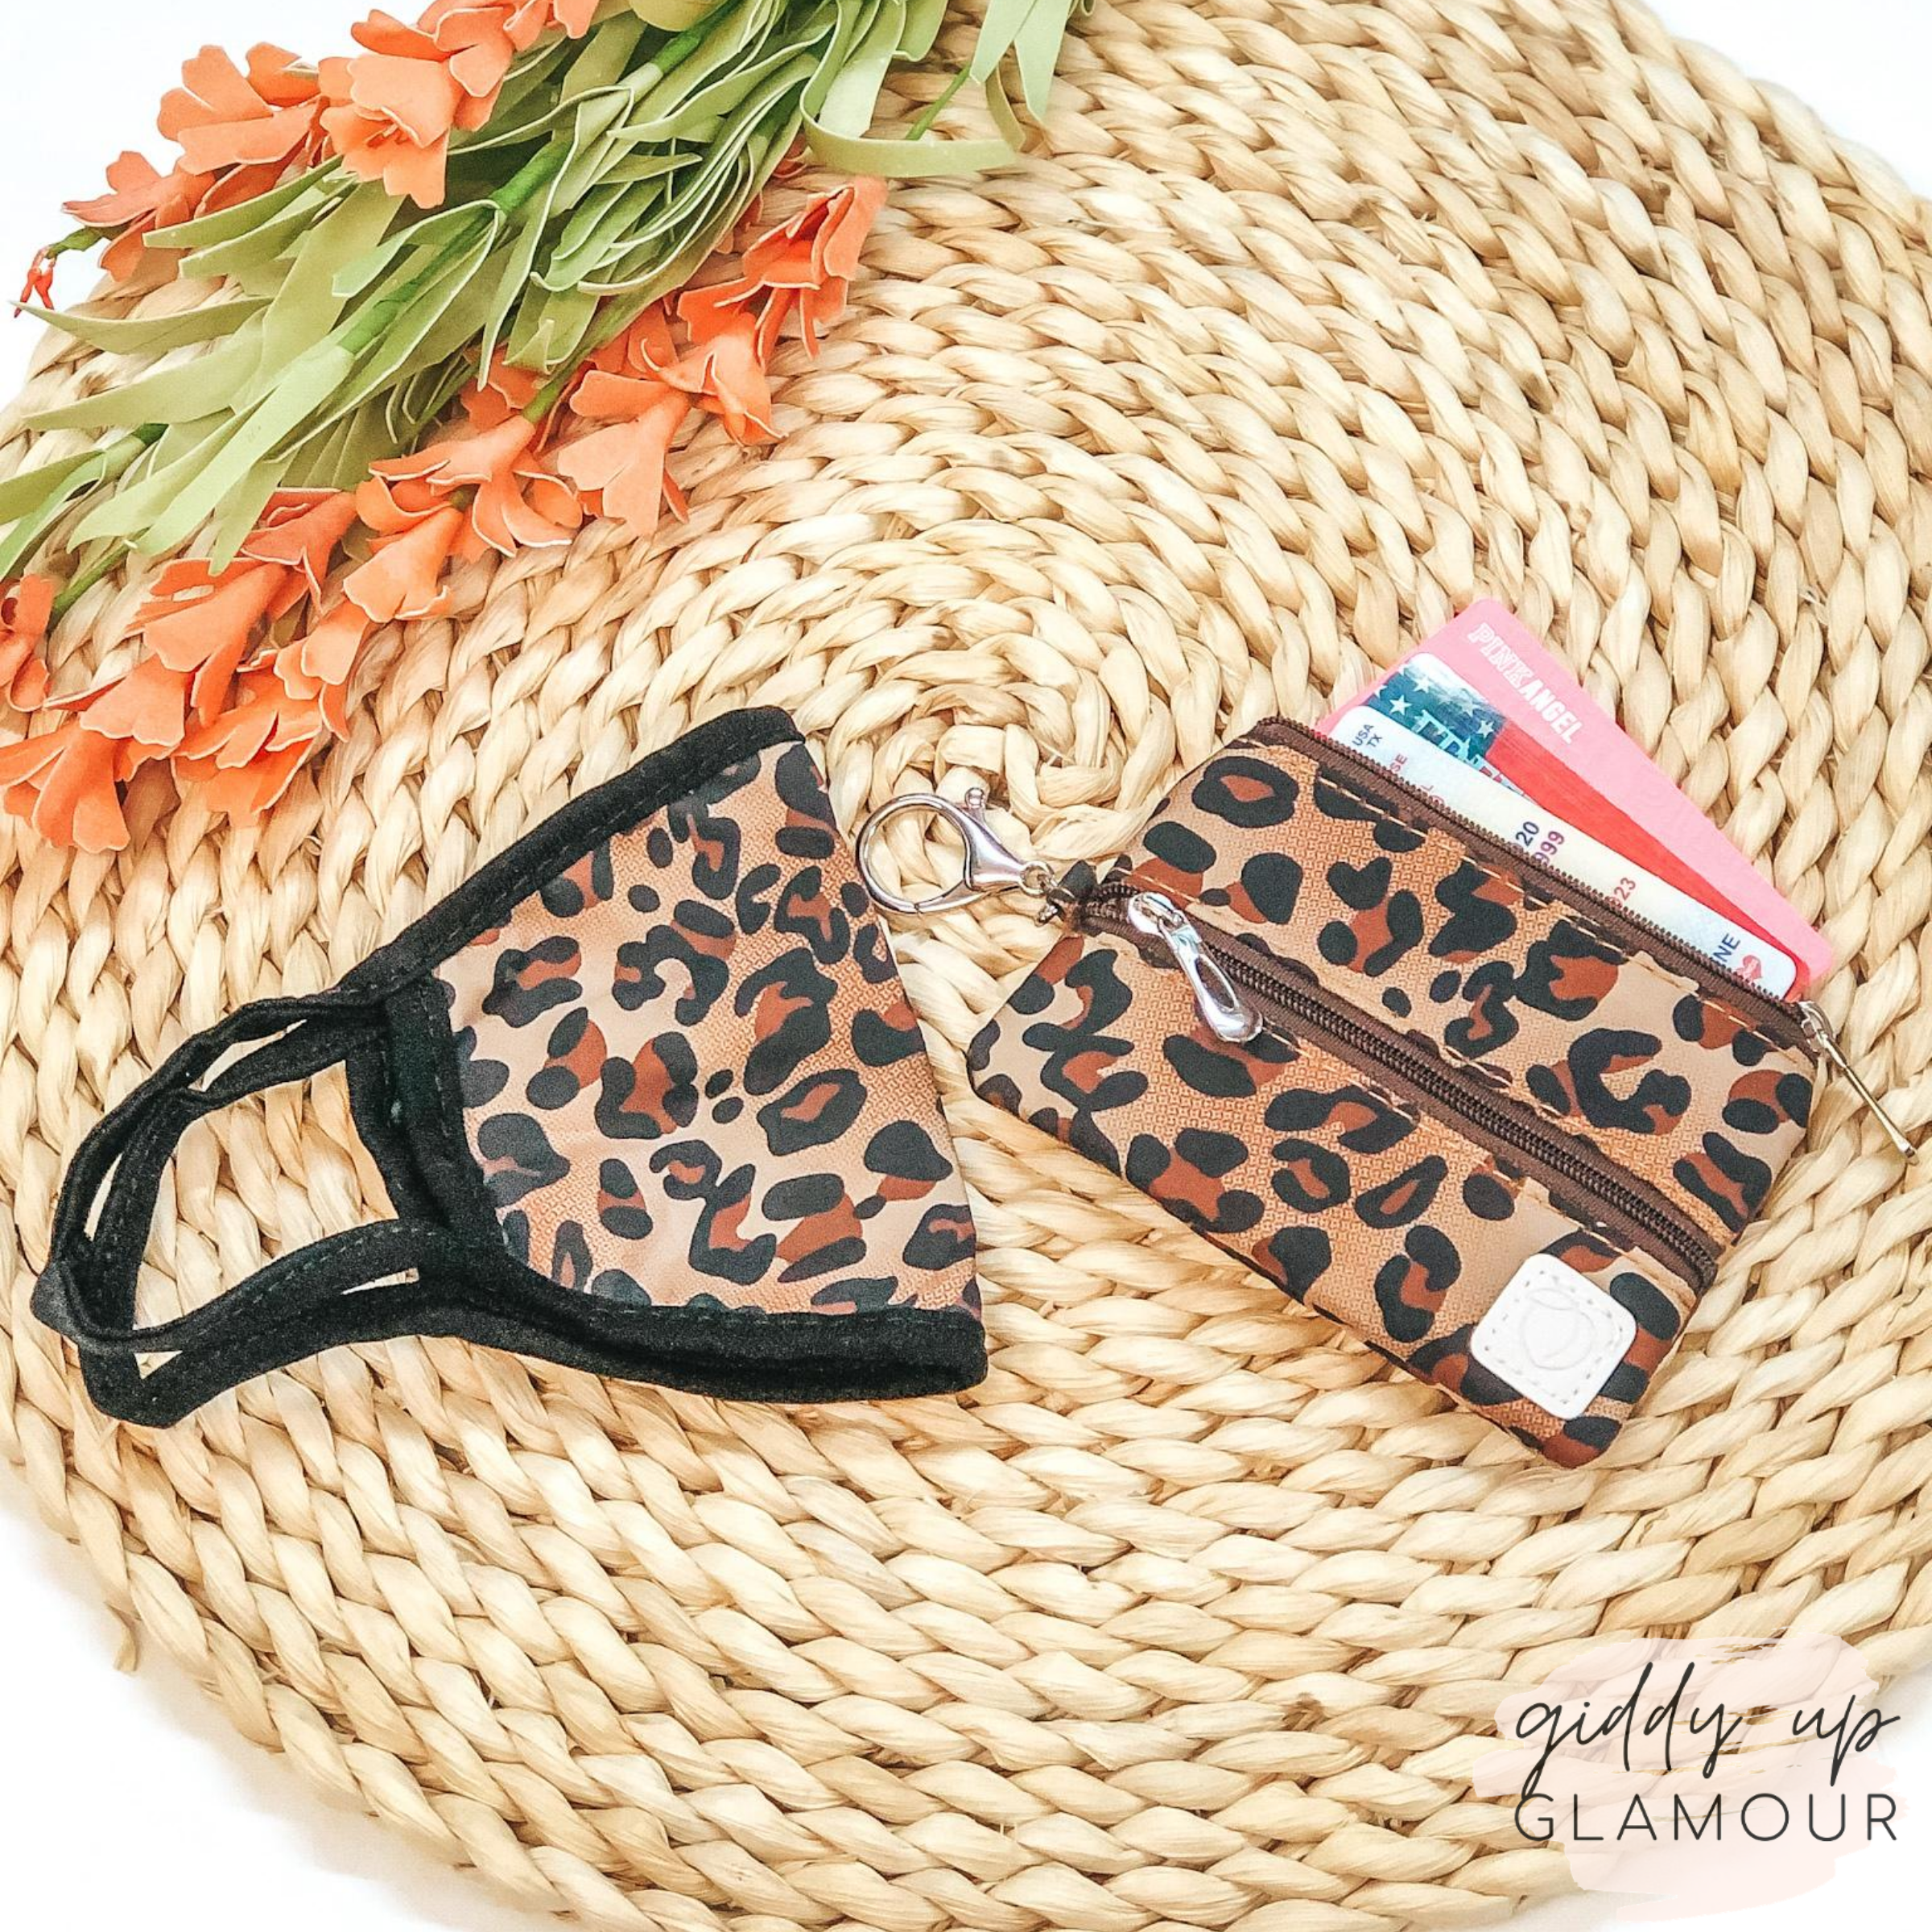 Packed with Style Leopard Mini Versi Bag with Face Covering Included in Brown - Giddy Up Glamour Boutique